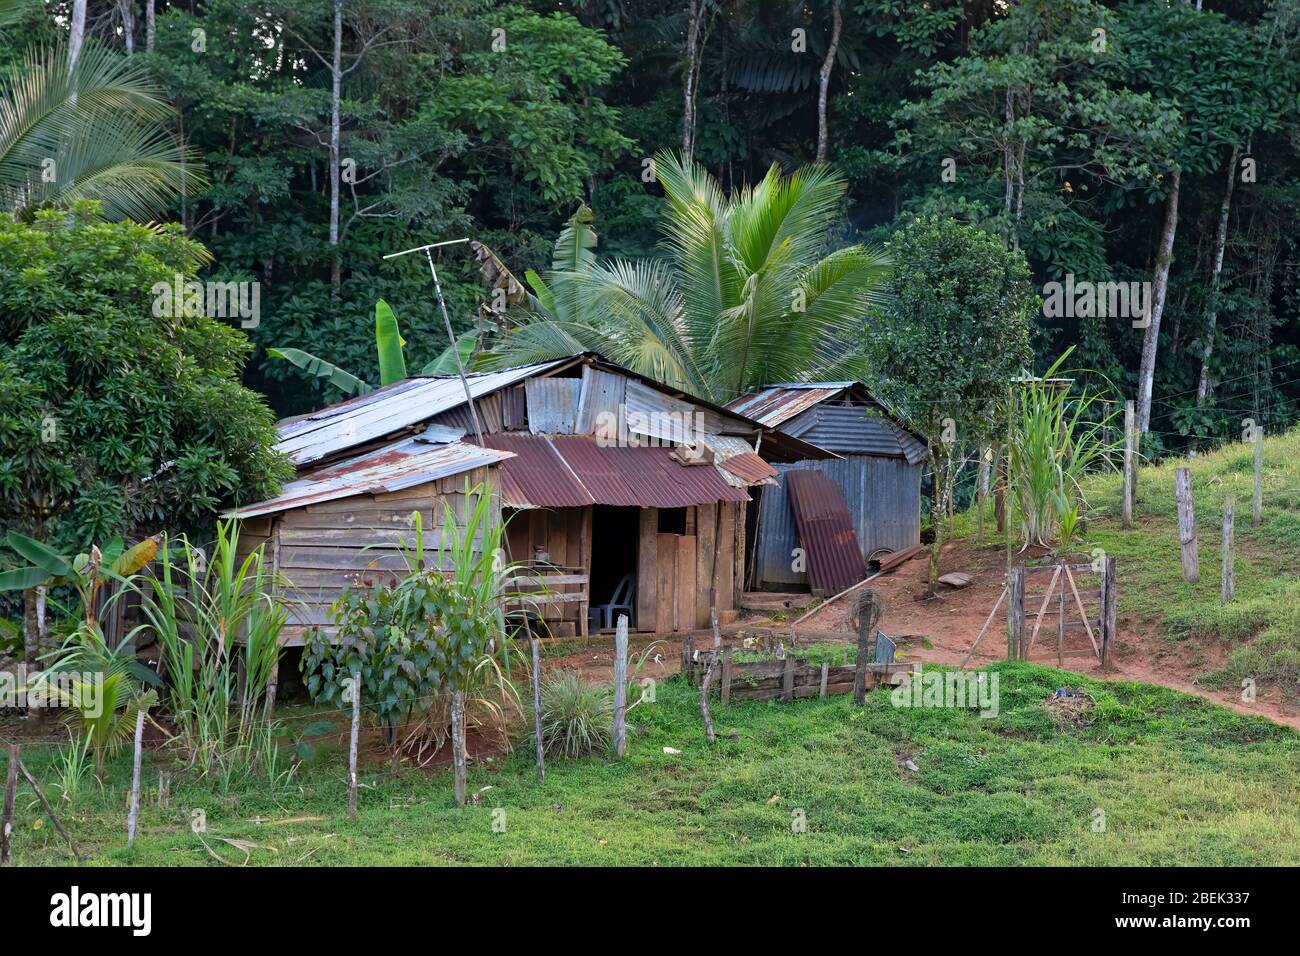 Tin sheet metal dilapidated house in the jungles of Costa Rica Stock Photo